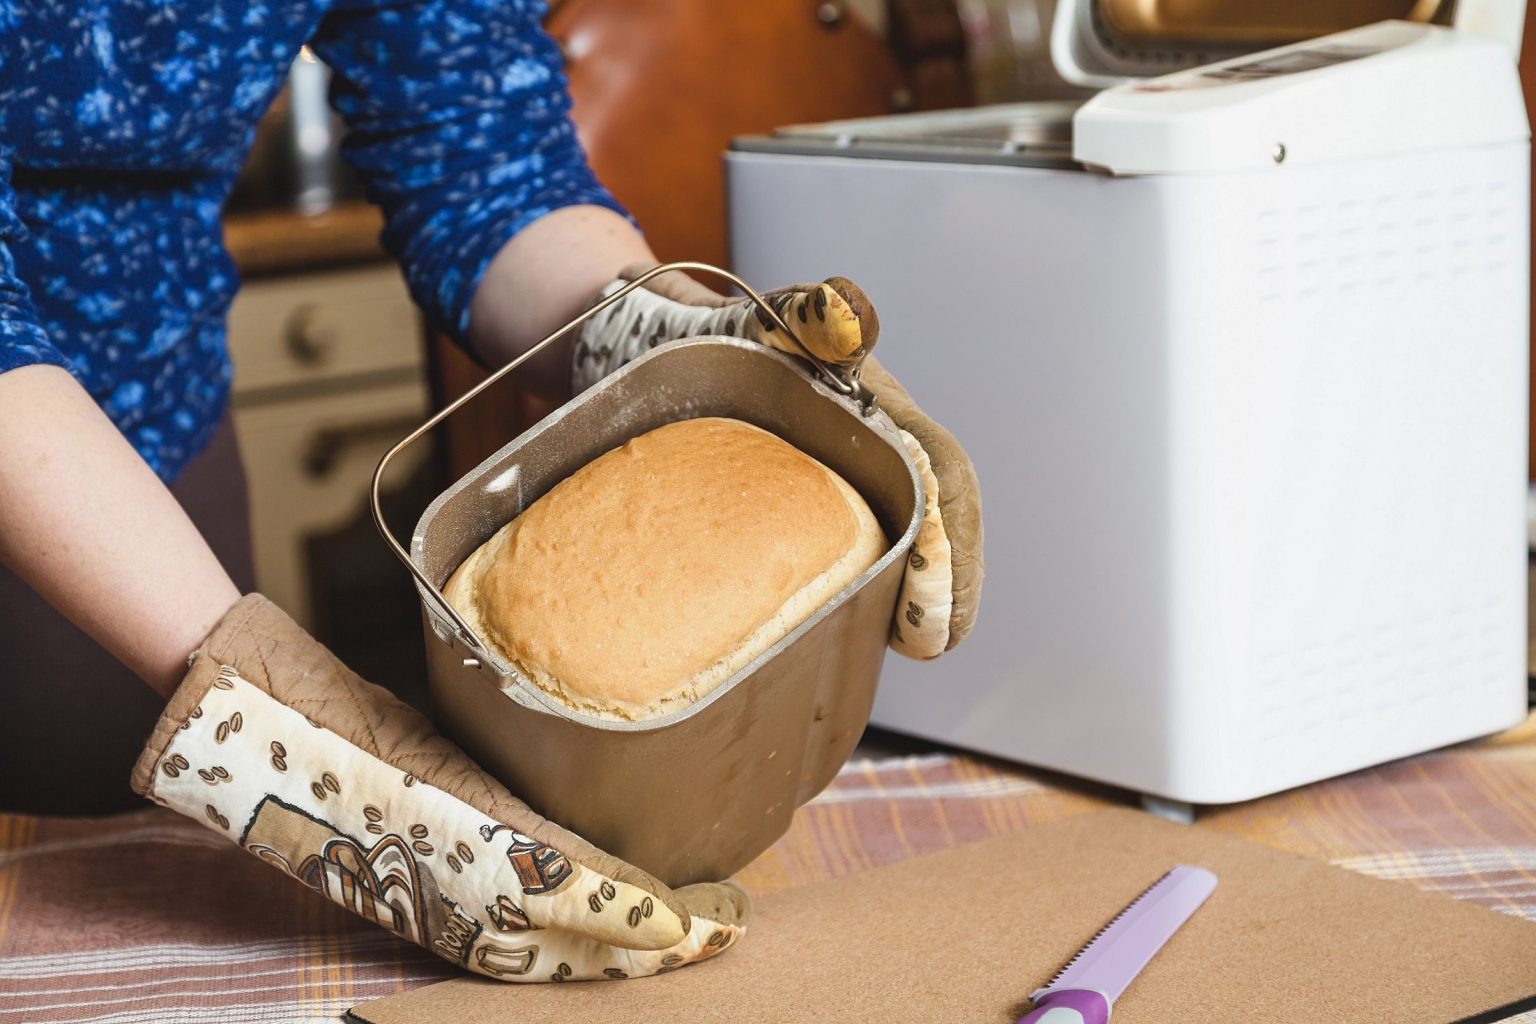 Female hands in kitchen gloves holding metal mold for baking bread. Inside appetizing hot loaf of bread. Behind is an electric bread maker